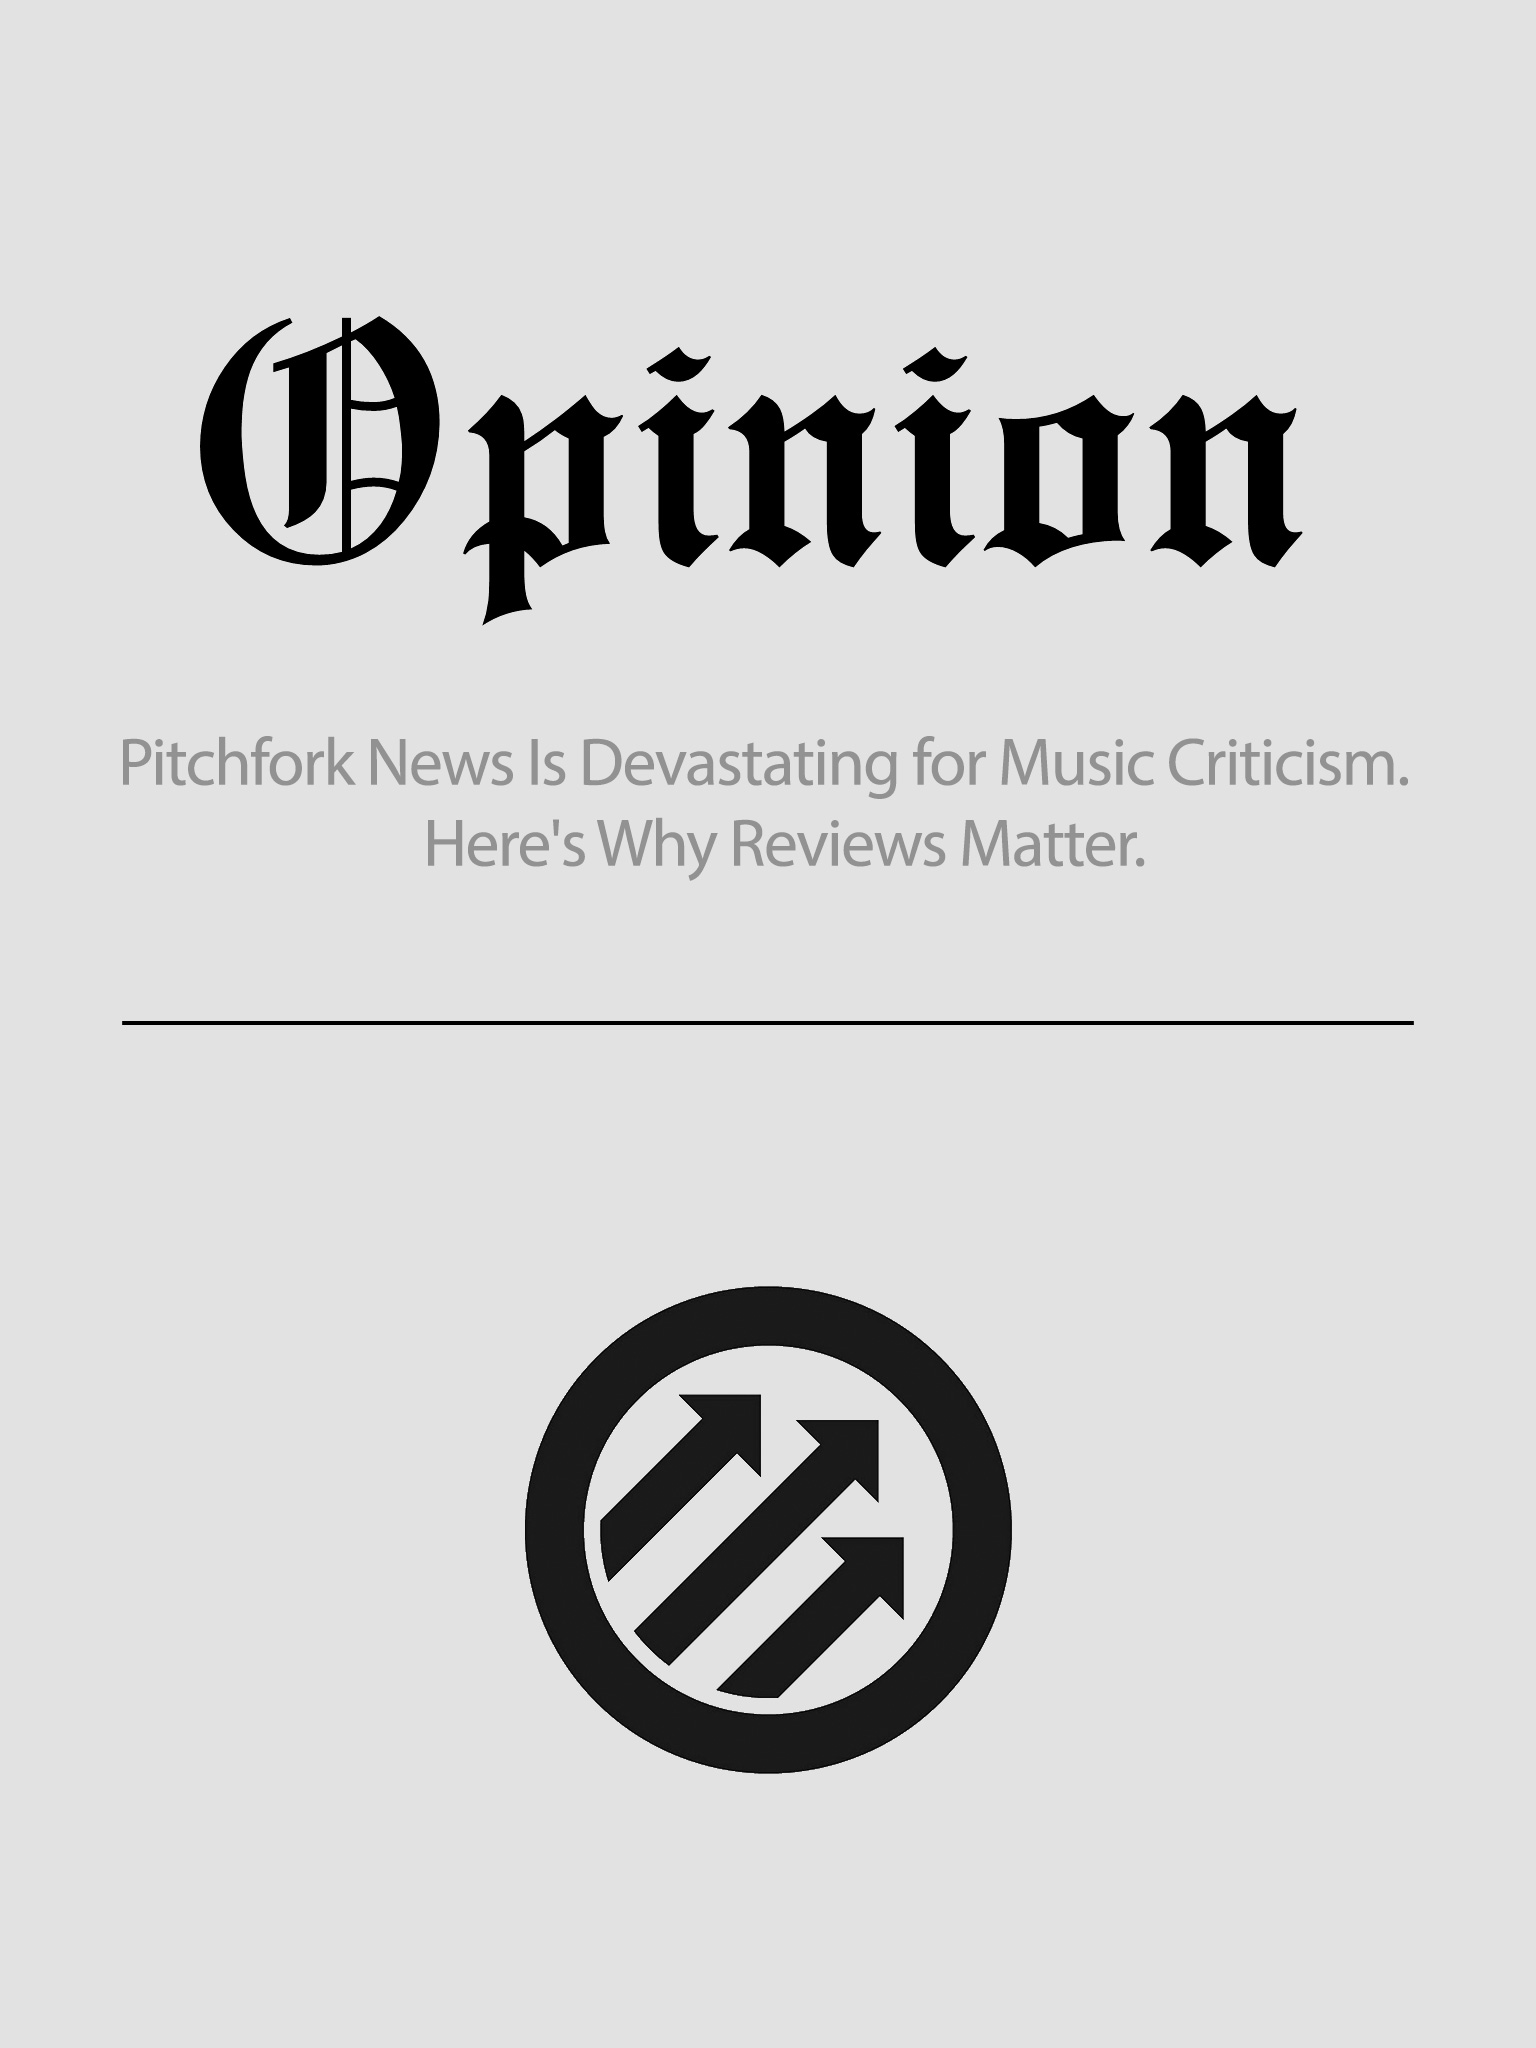 Opinion: Pitchfork News Is Devastating for Music Criticism. Here's Why Reviews Matter.